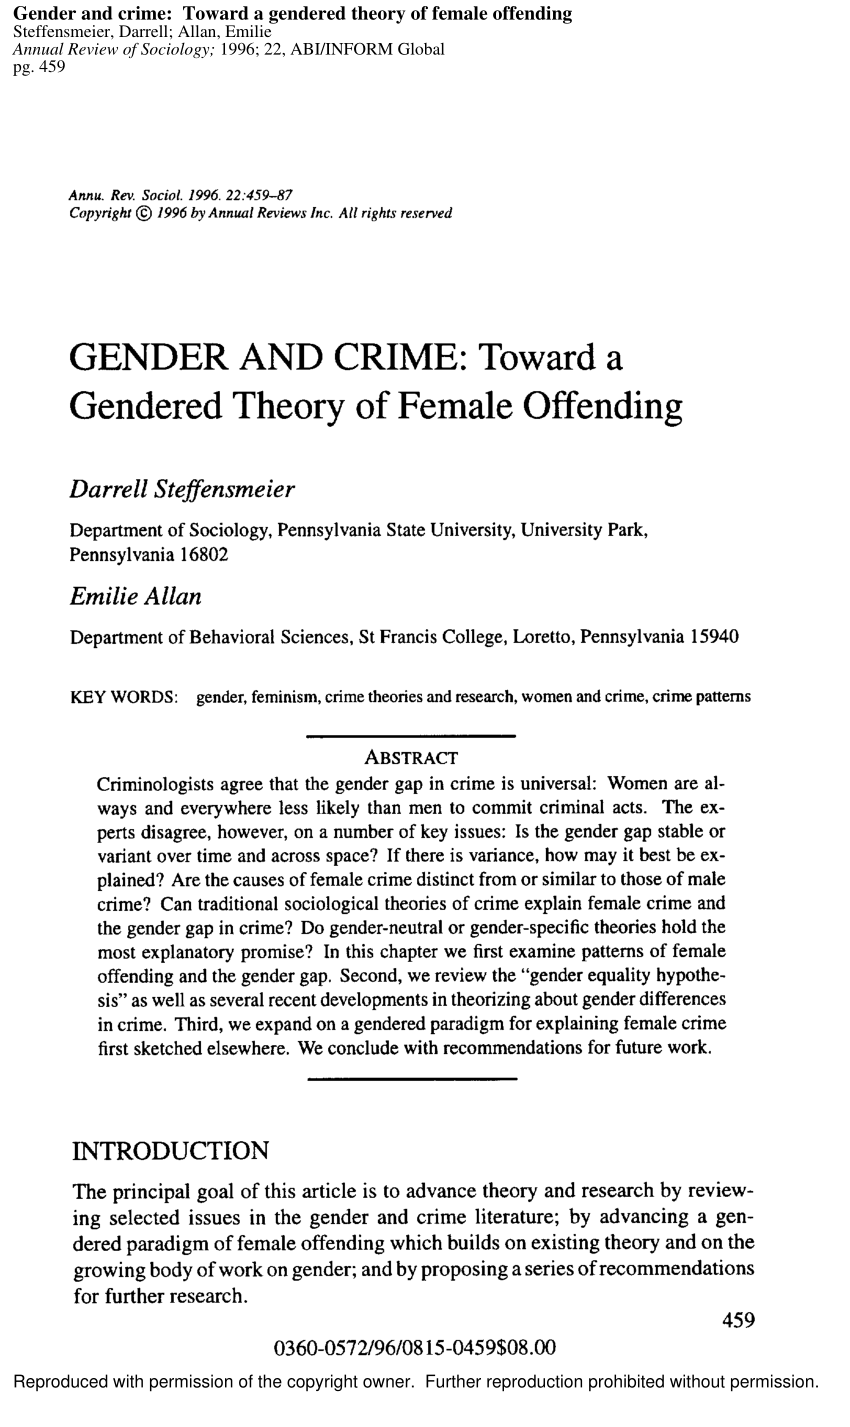 research paper on gender and crime